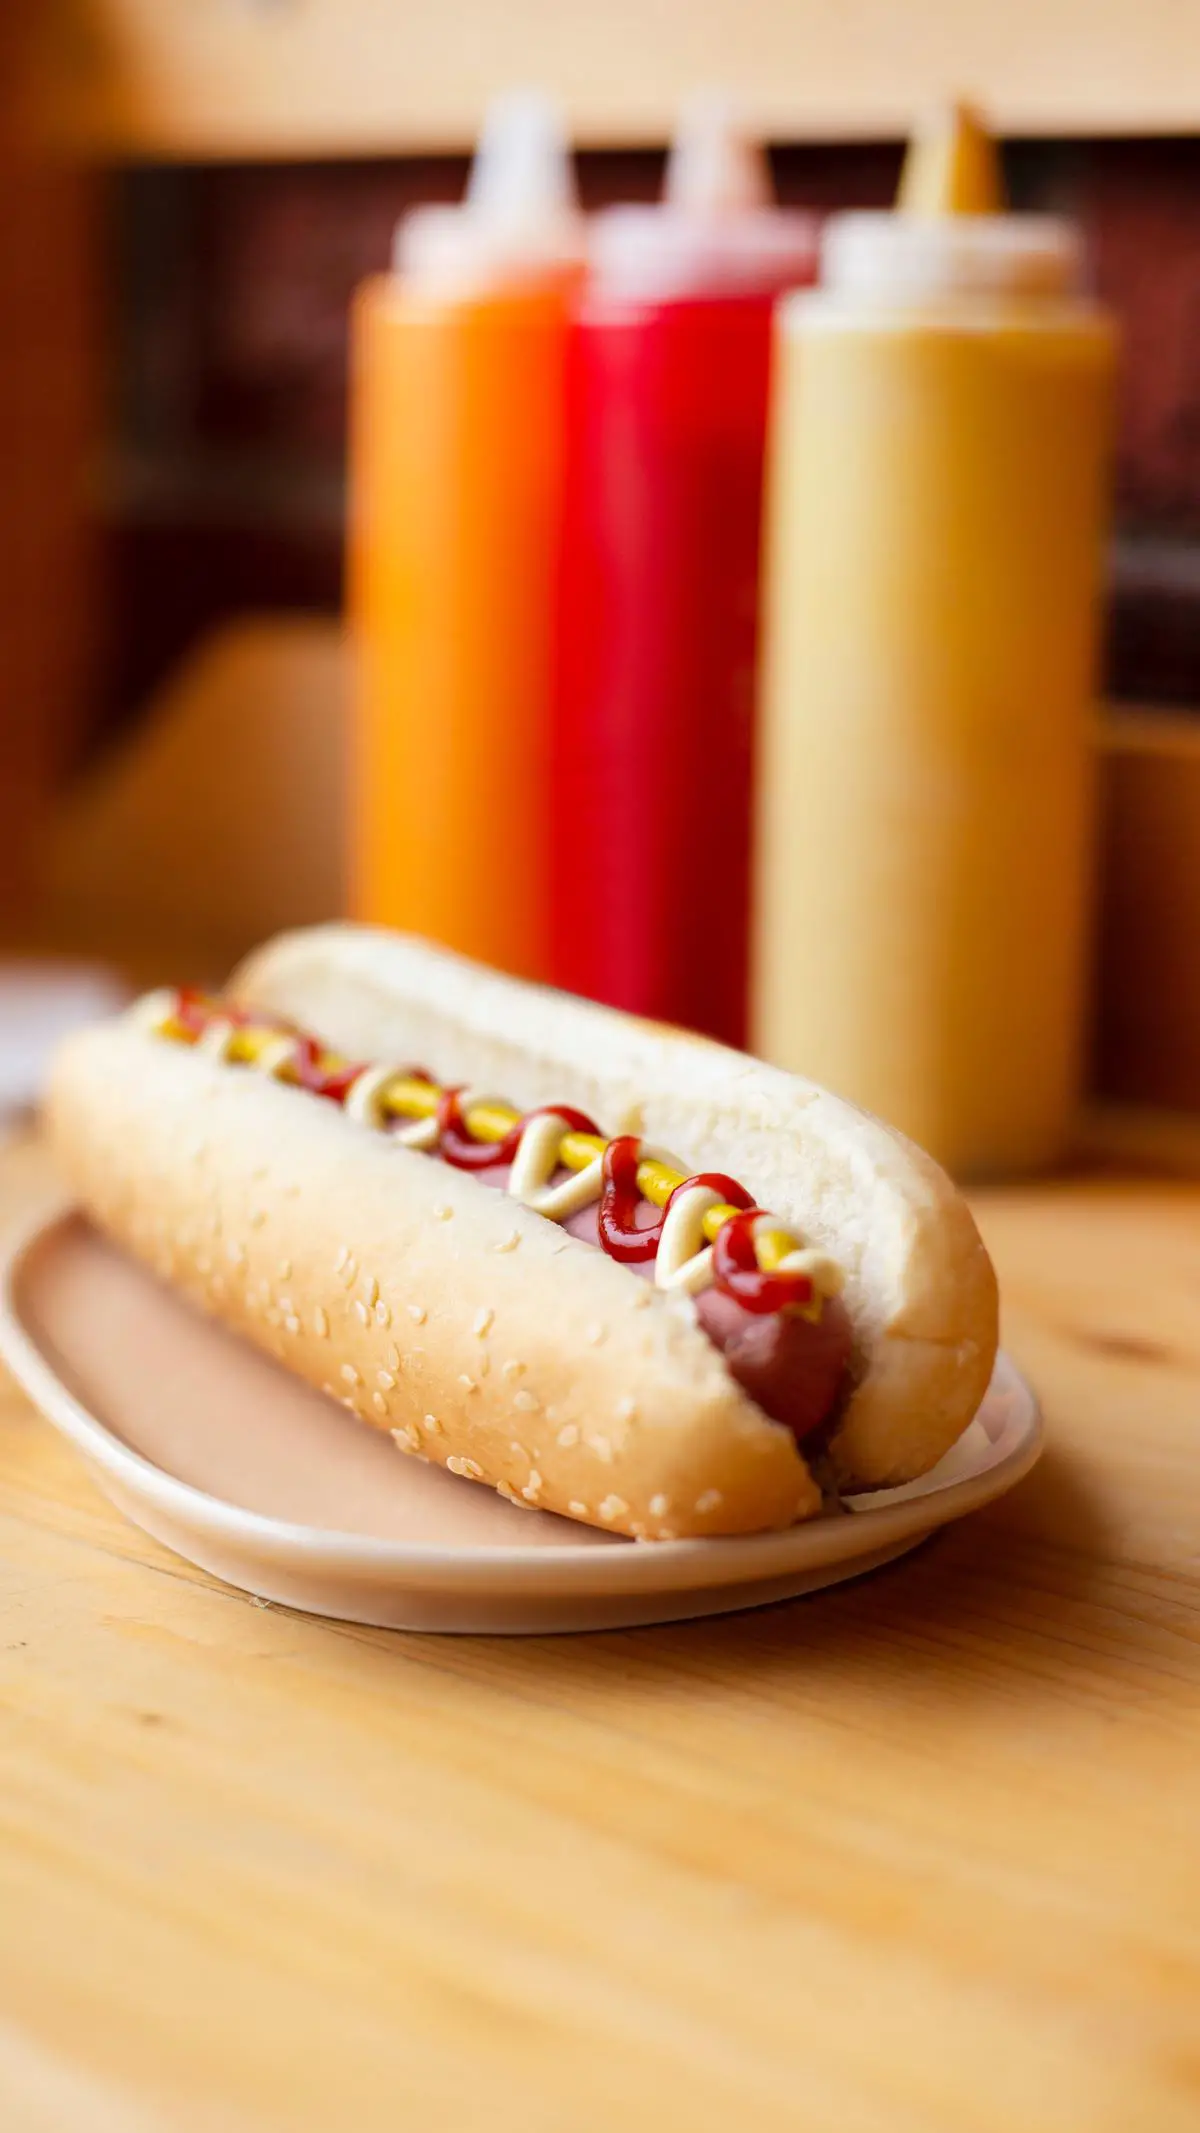 A picture of a hot dog with ketchup and mustard, a classic American food.